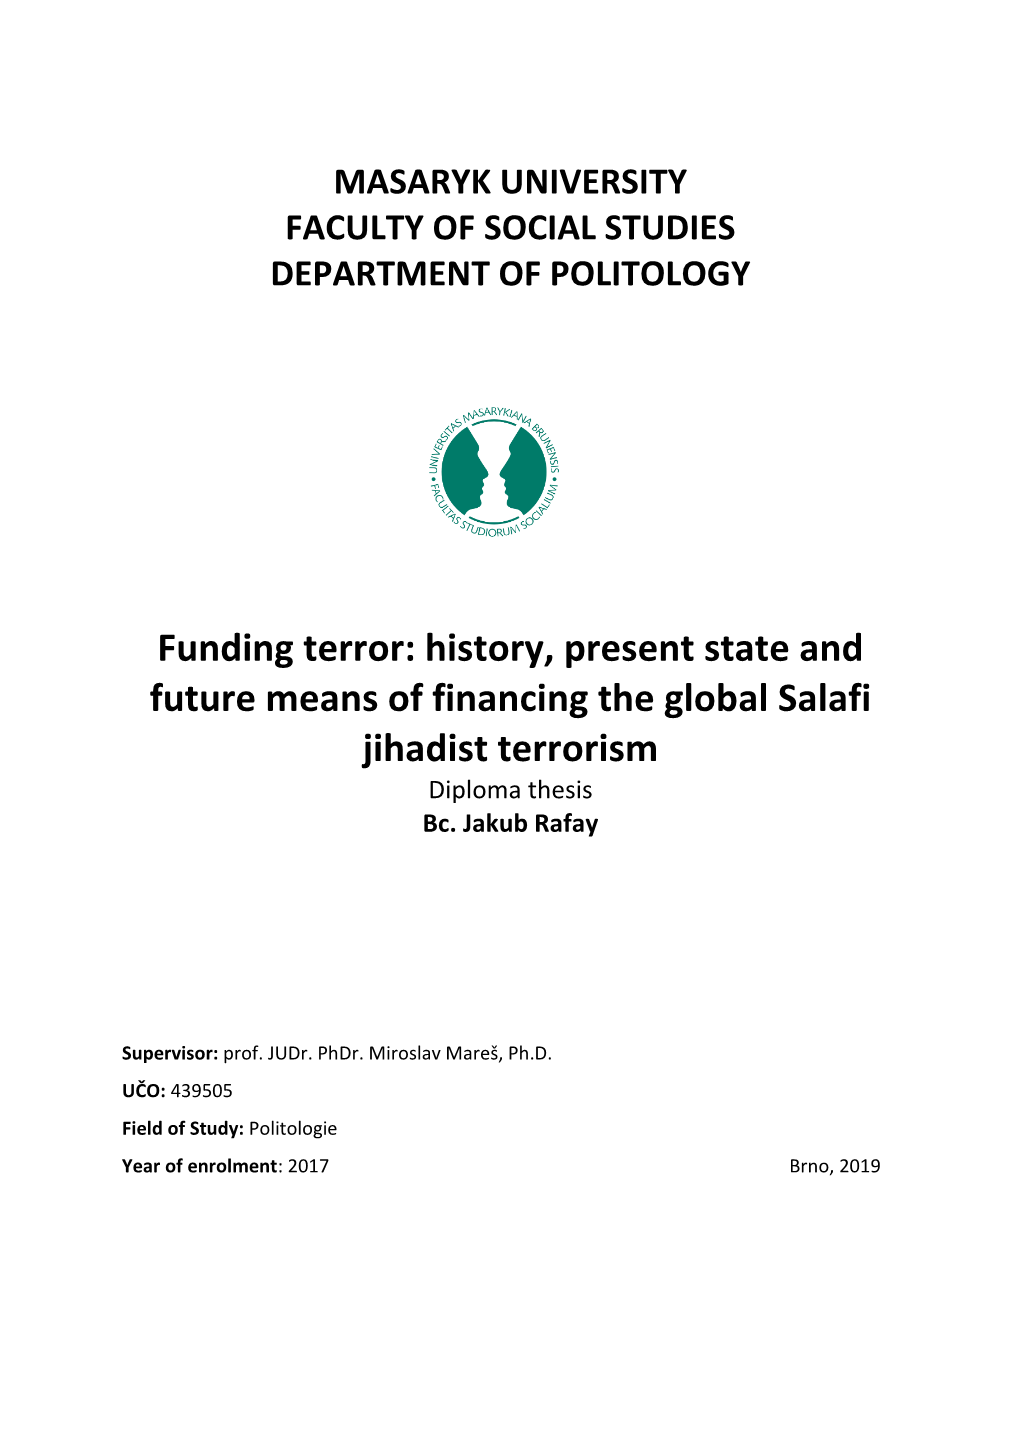 Funding Terror: History, Present State and Future Means of Financing the Global Salafi Jihadist Terrorism Diploma Thesis Bc